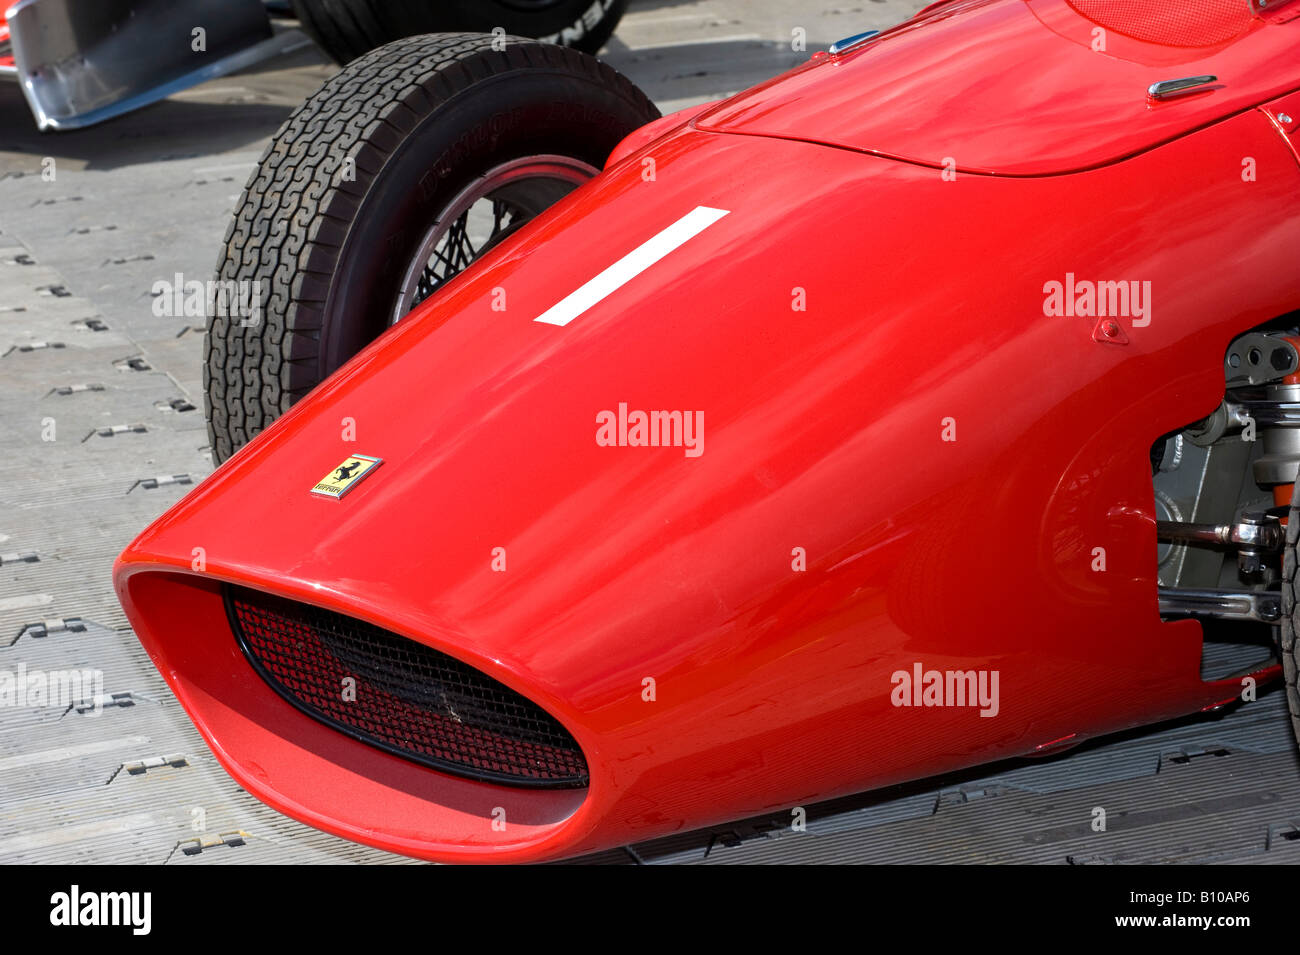 red no 1 mike hawthorn ferrari f1 formula one raceing car at goodwood festival of speed Stock Photo